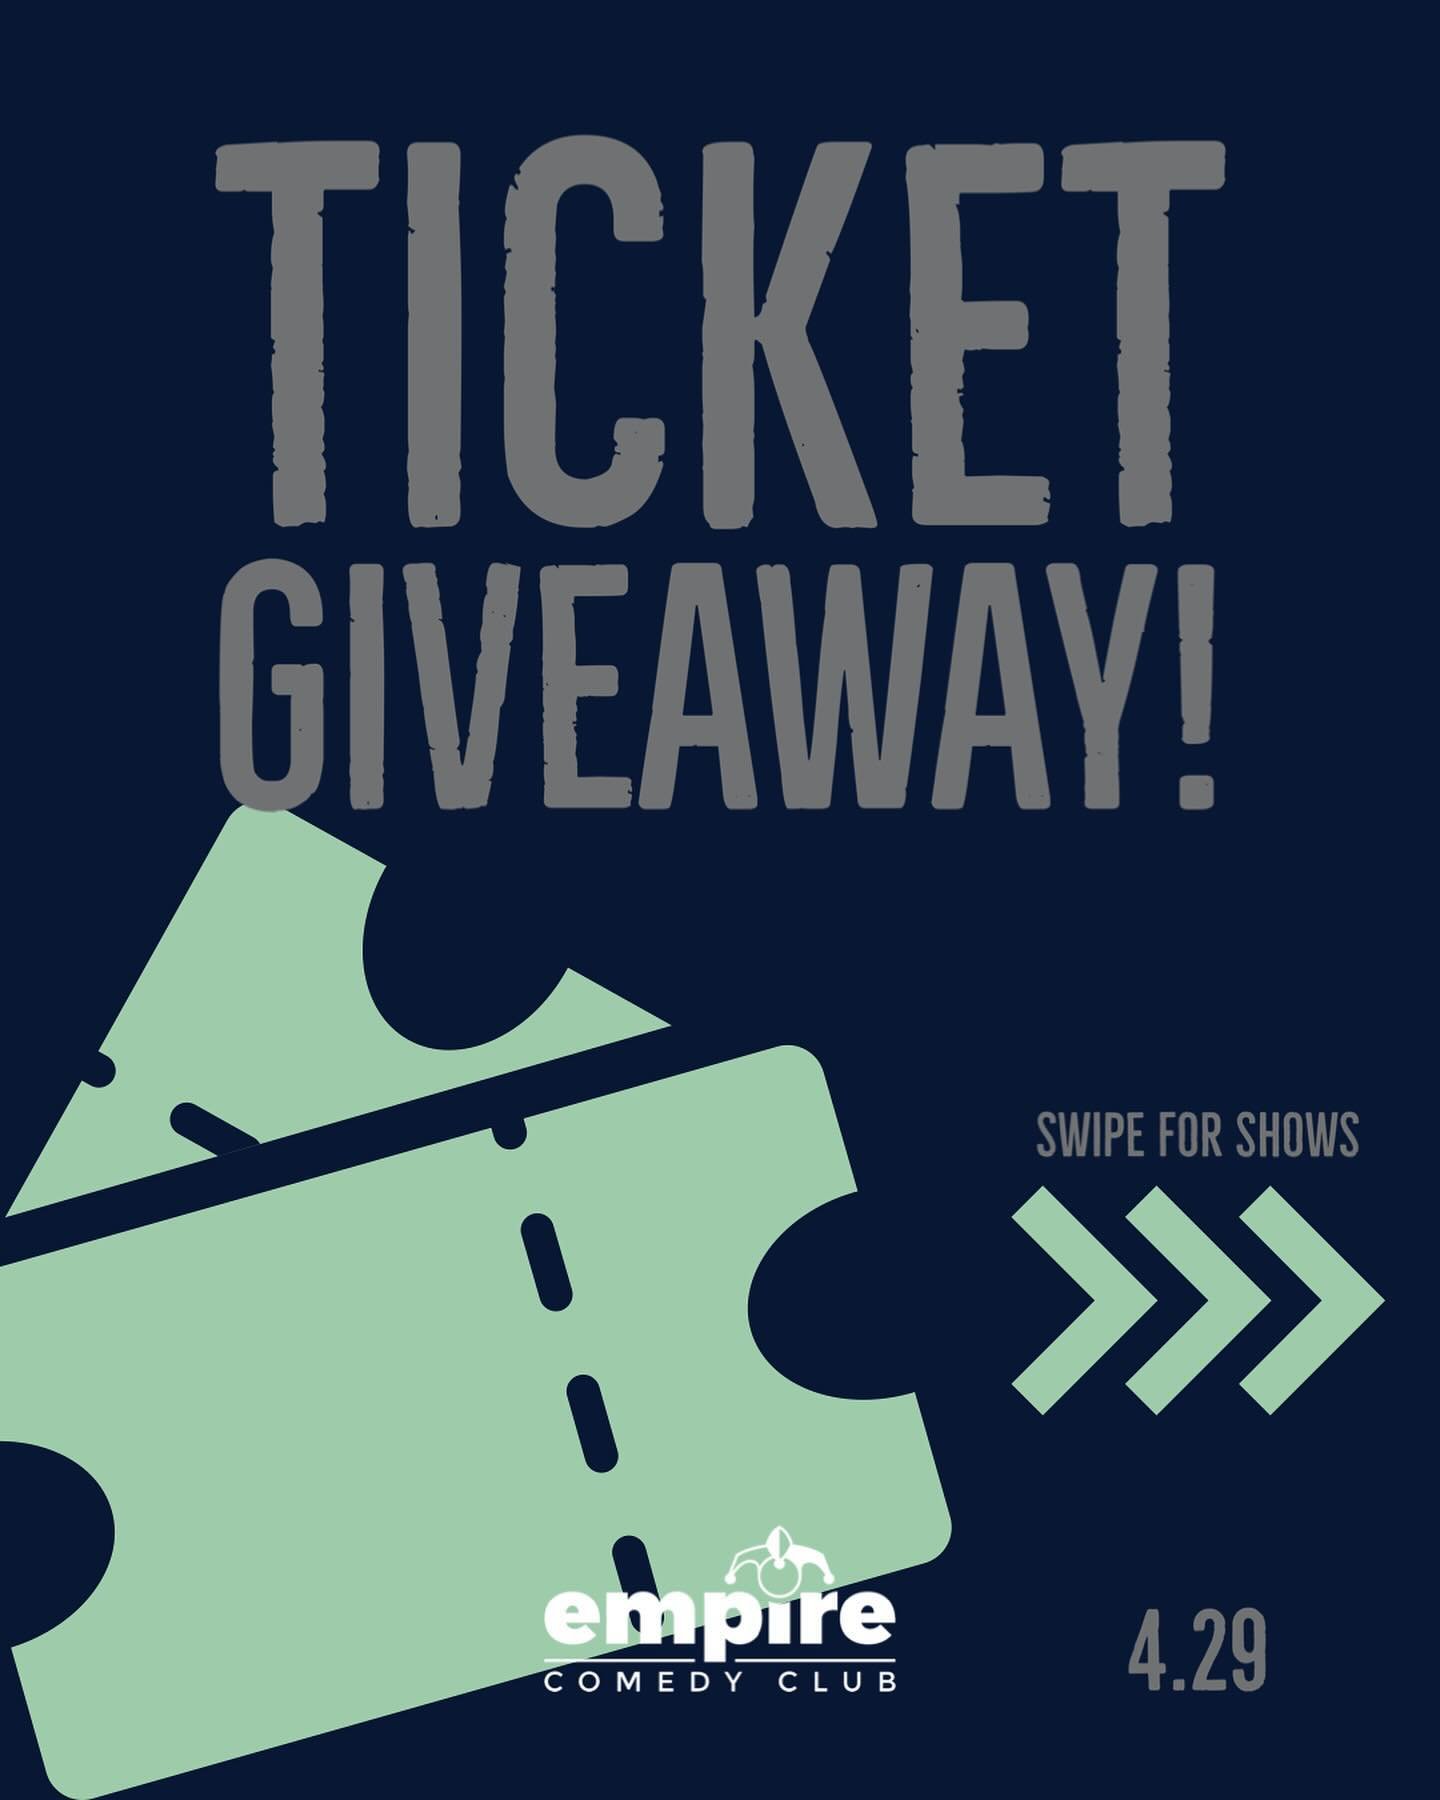 🎉 **GIVEAWAY ALERT!** 🎉
Empire Comedy Club weekly ticket giveaway! 4.29
BIG COMEDY WEEK AHEAD! *We added a STEP to win*

To enter:
1️⃣ Like this post
2️⃣ Share this post
3️⃣ Follow our pages
4️⃣ Tag a friend(s)
Each tag is an additional entry, so t